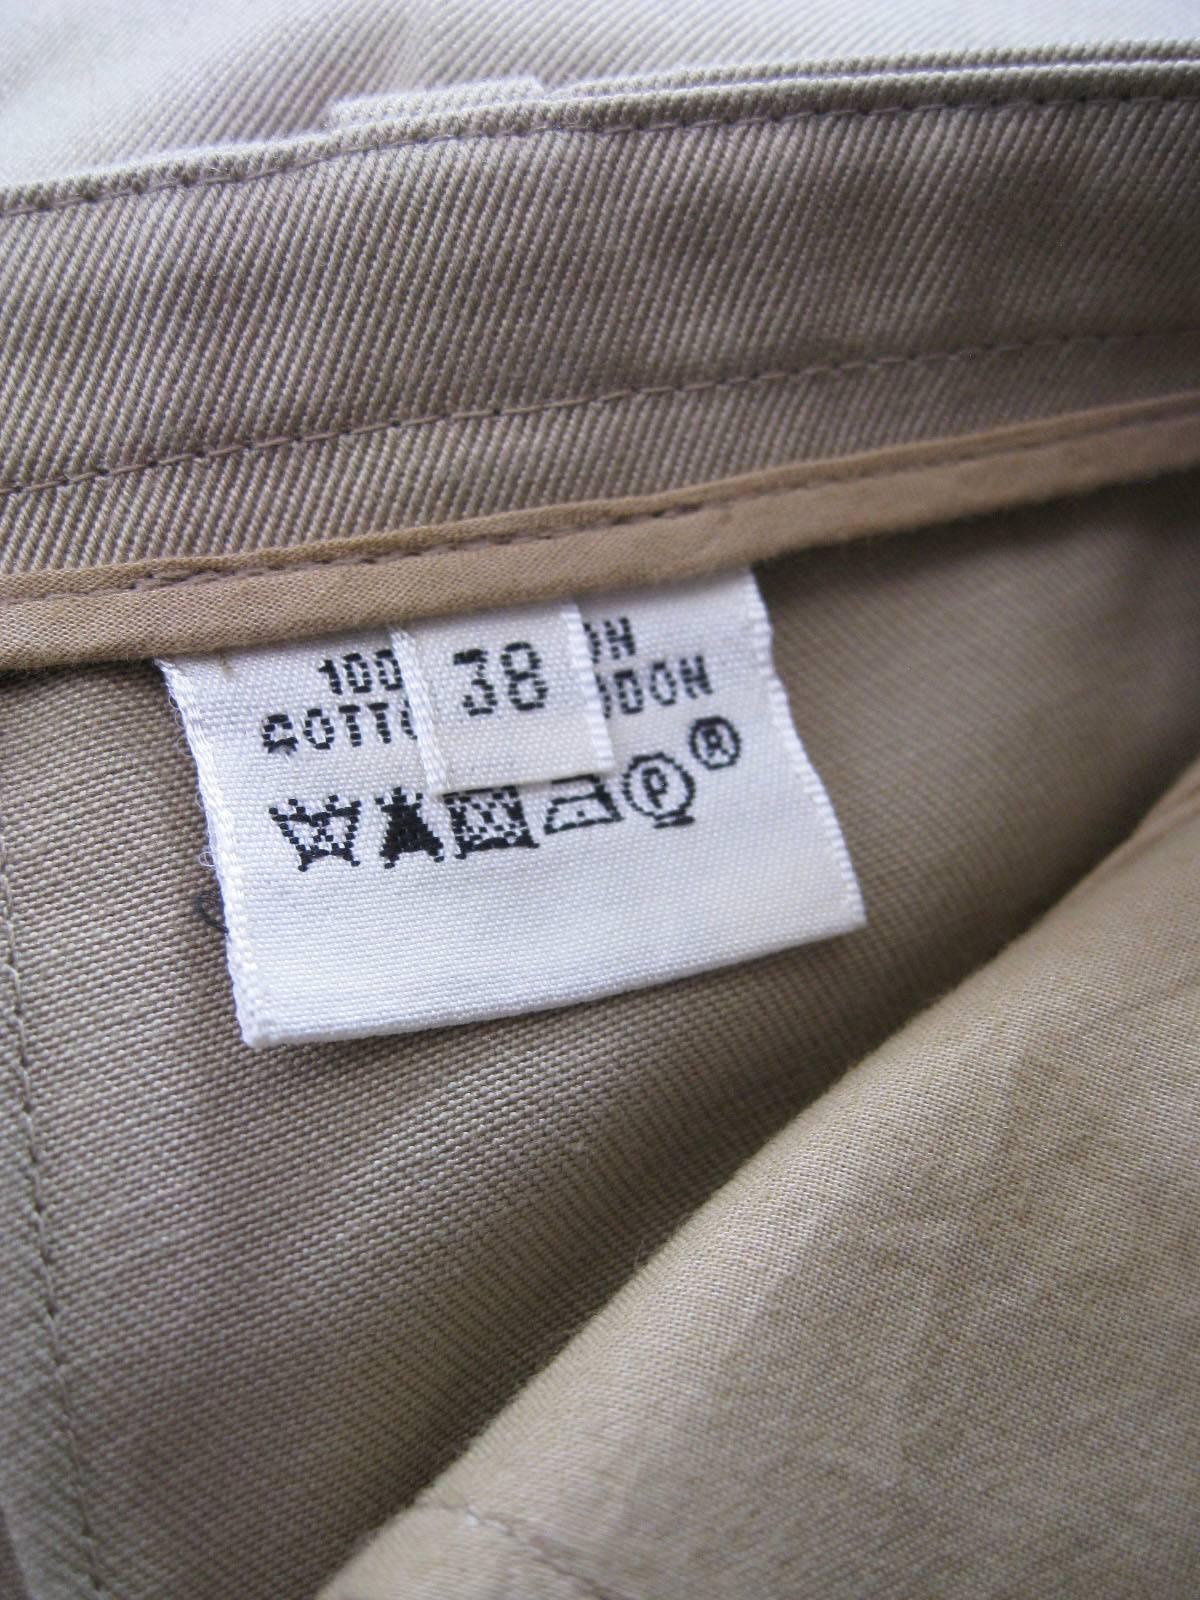 Hermes Classic Cotton Khaki Pants Slacks In Good Condition For Sale In Oakland, CA